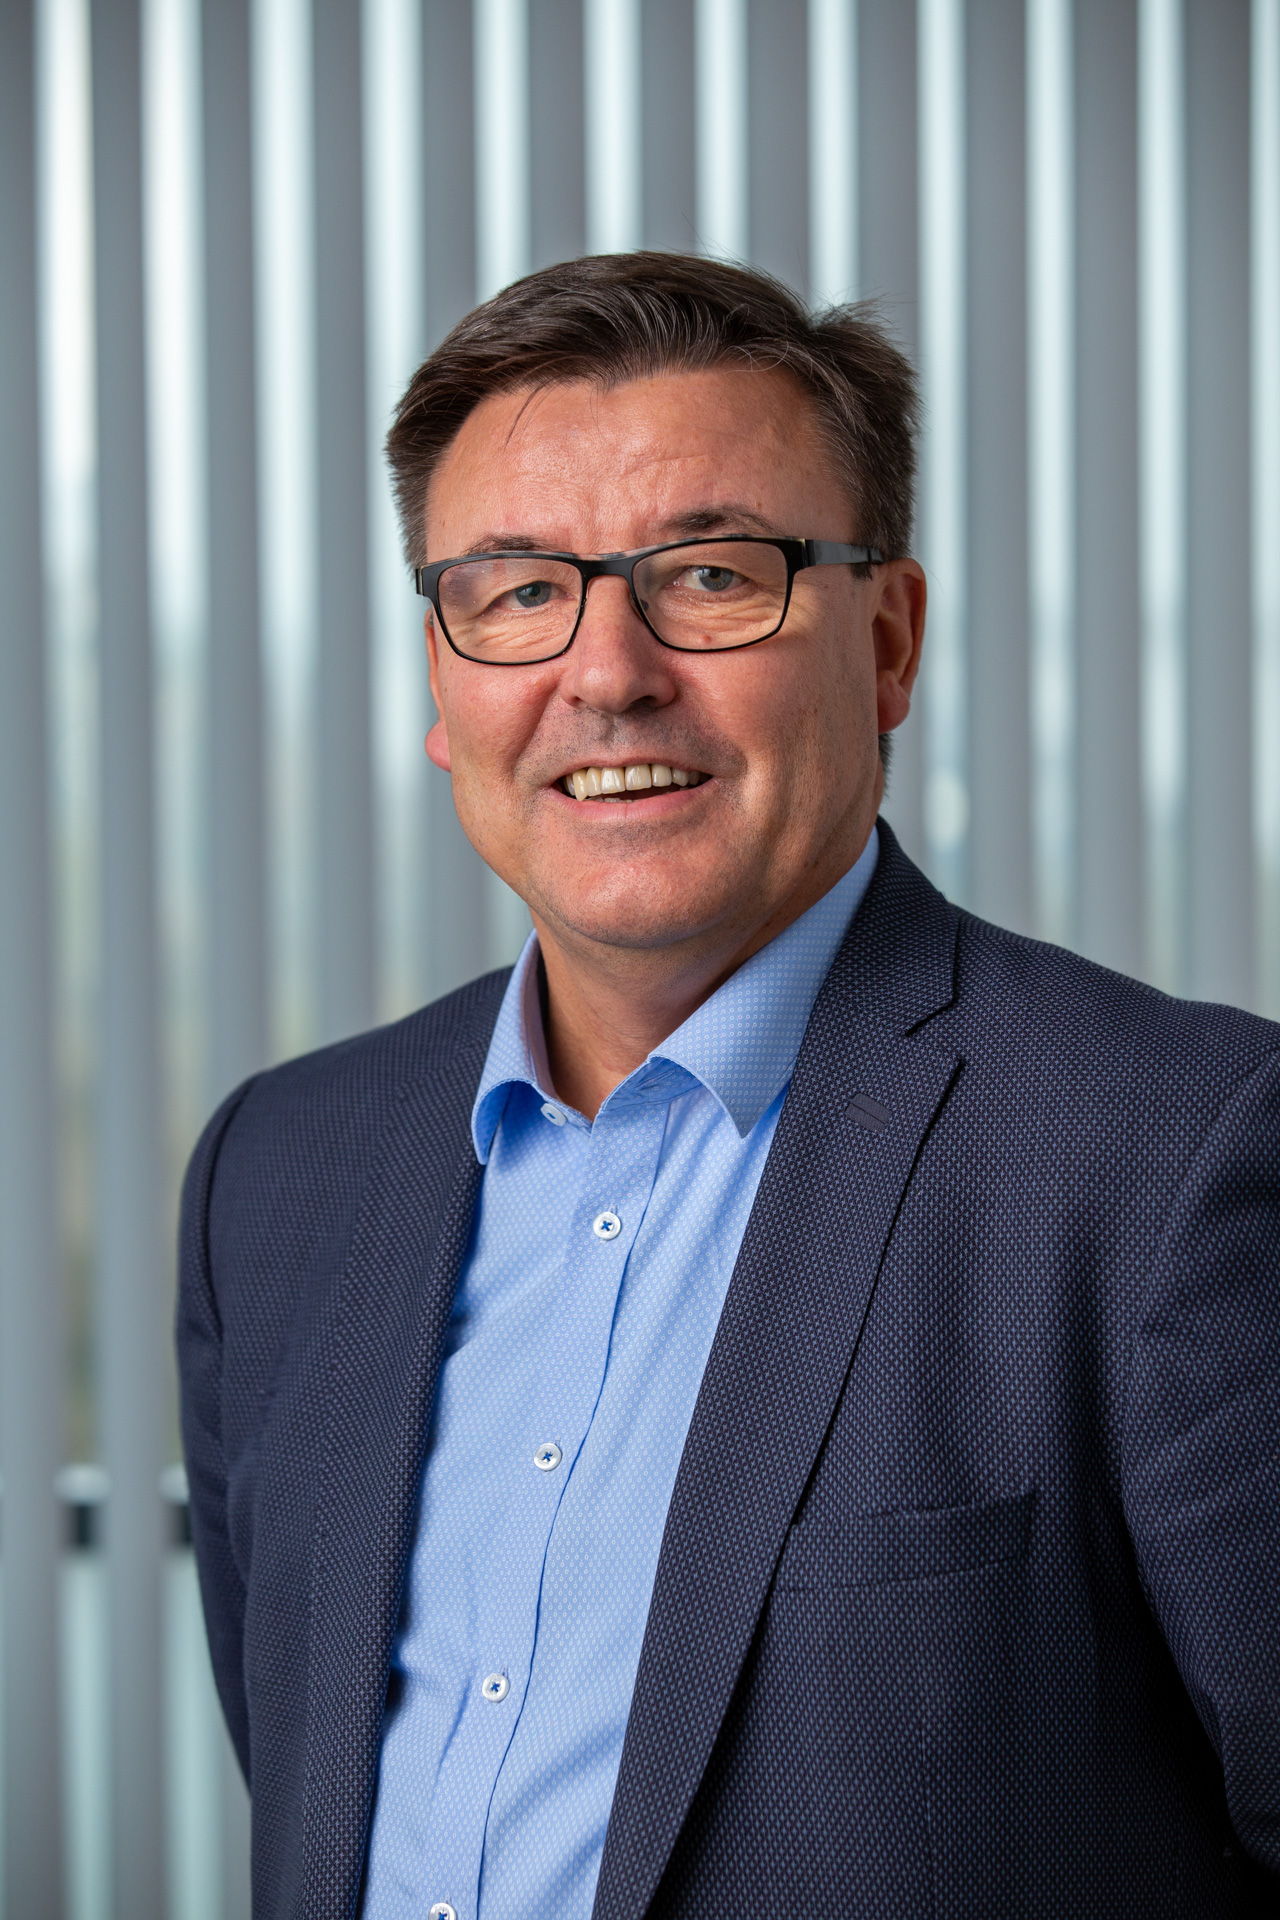 Ronny De Goedt - Managing Director at Wolters Kluwer Tax & Accounting